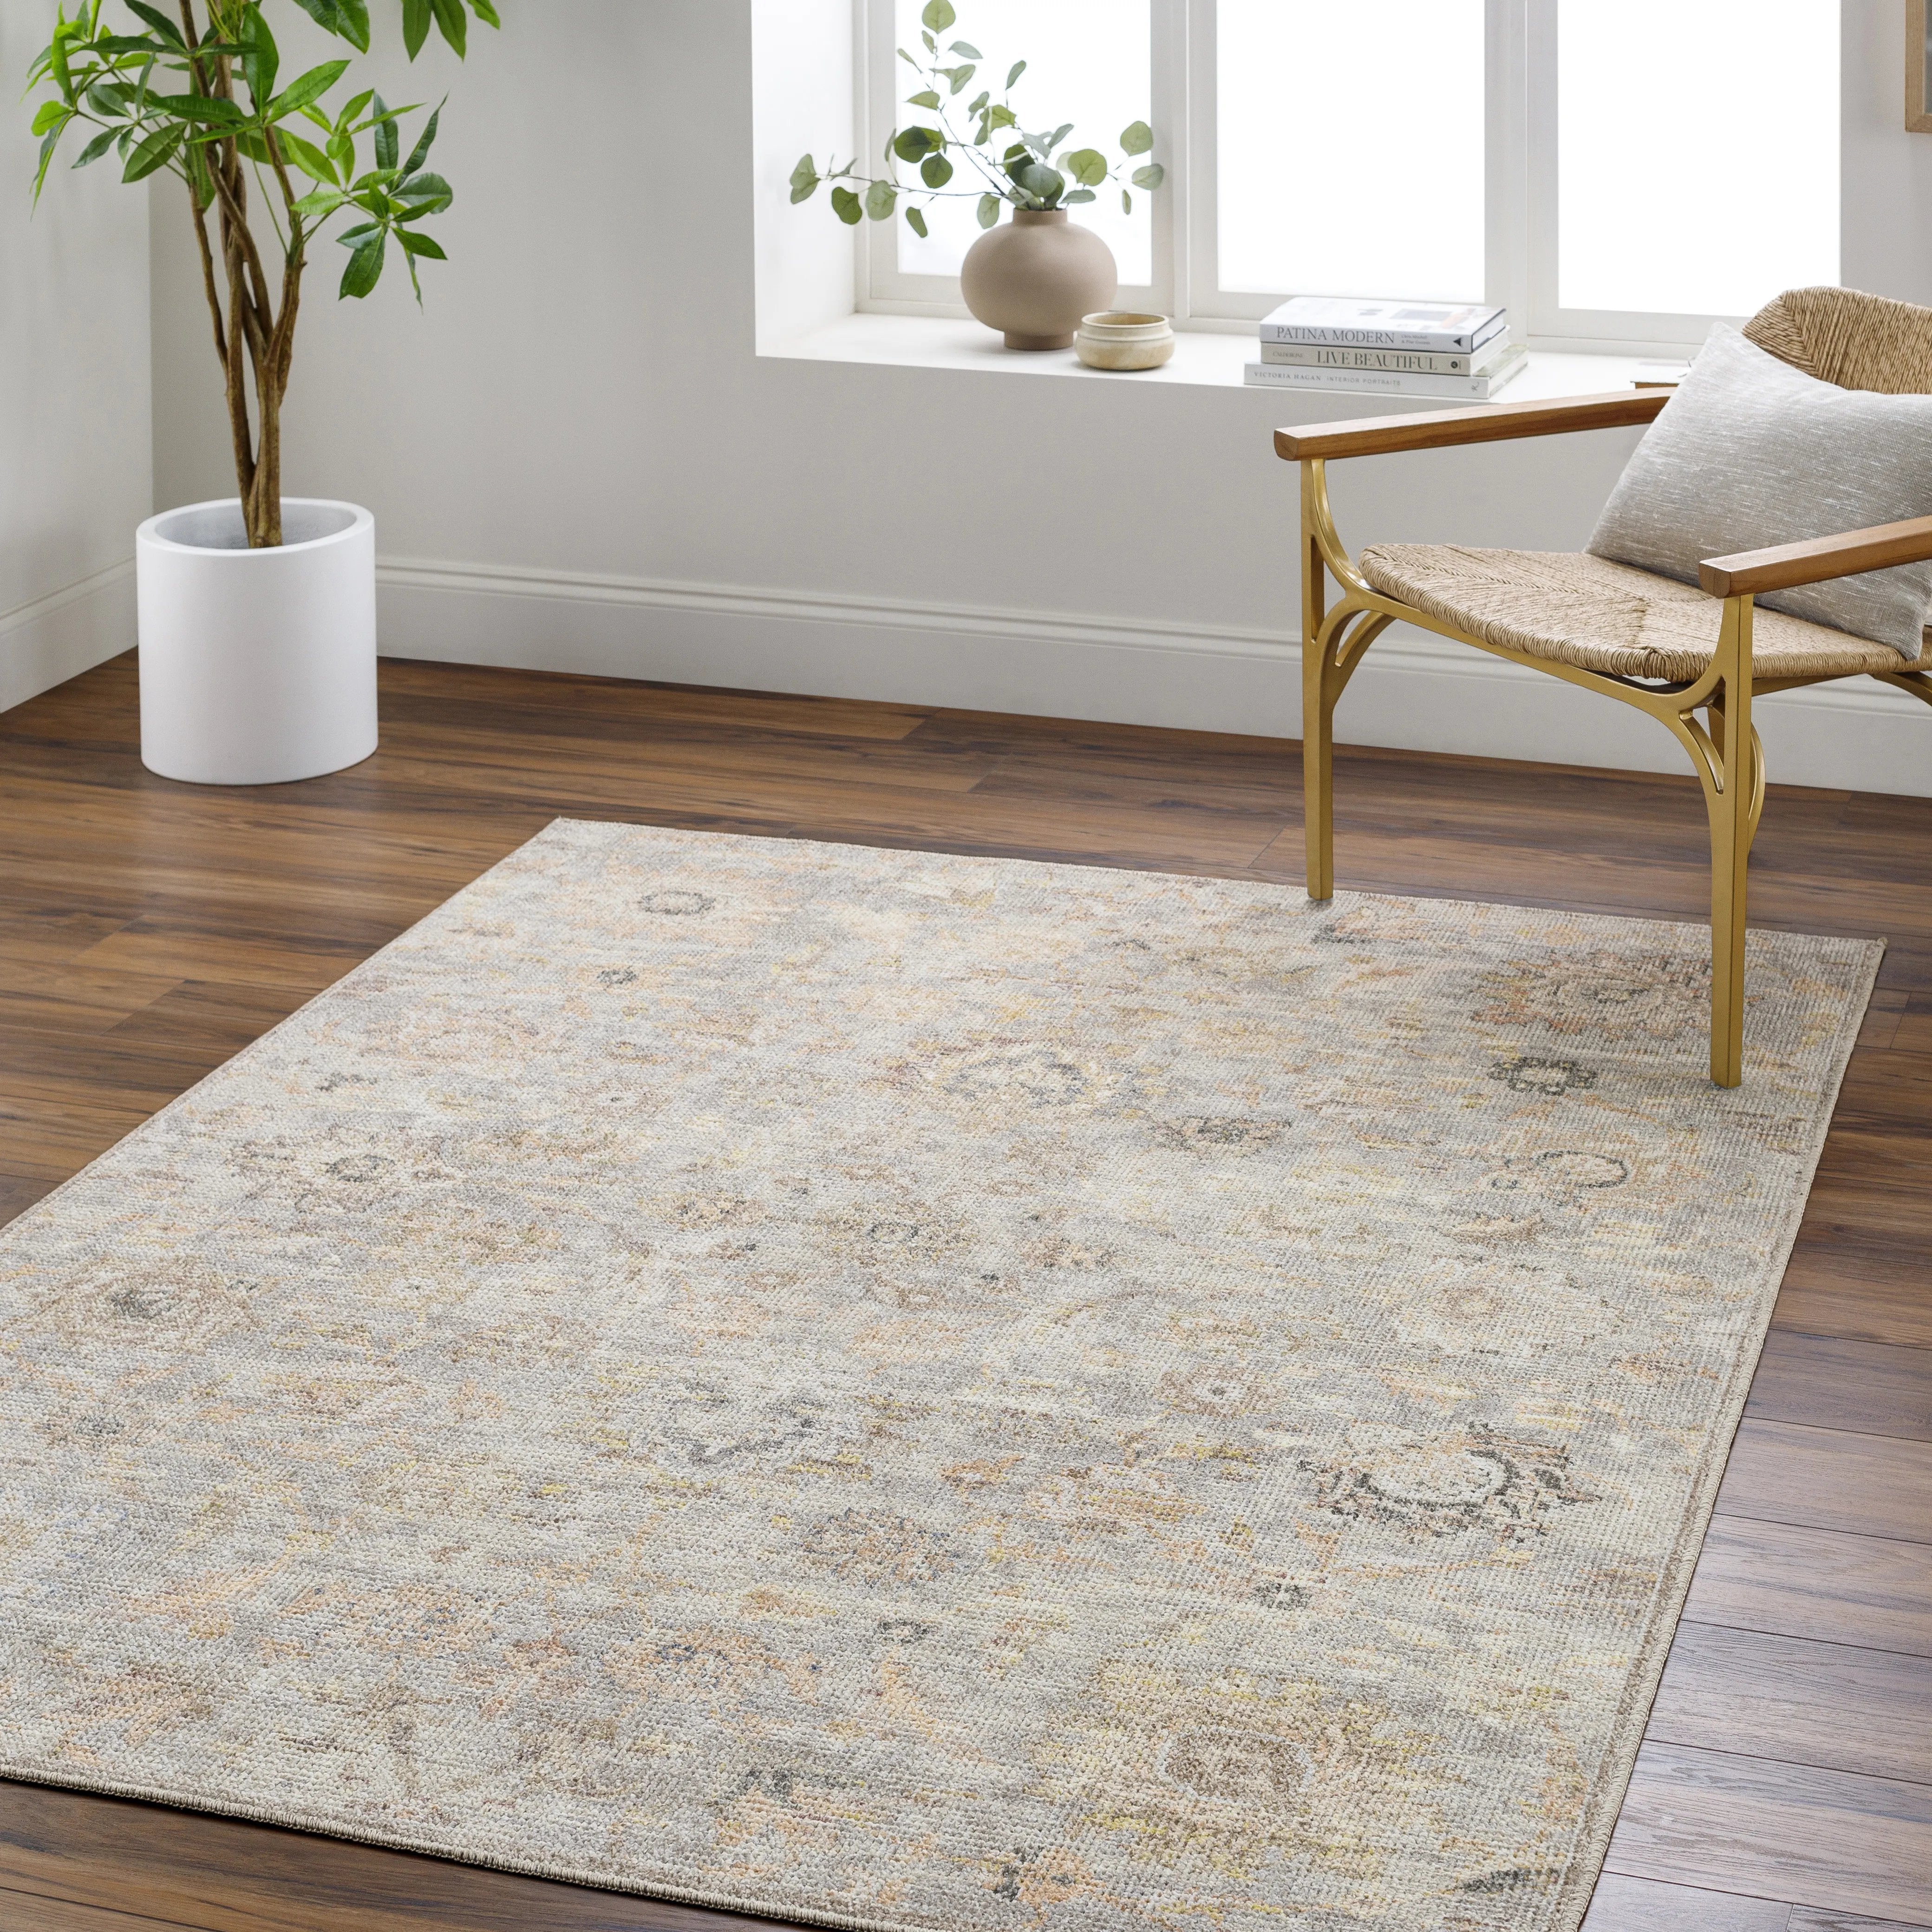 PNW Home x Surya available at Amethyst Home shipping to Australia, UK, and Canada. Organic modern design with easy to clean rugs for a family home in  the Boston metro area.